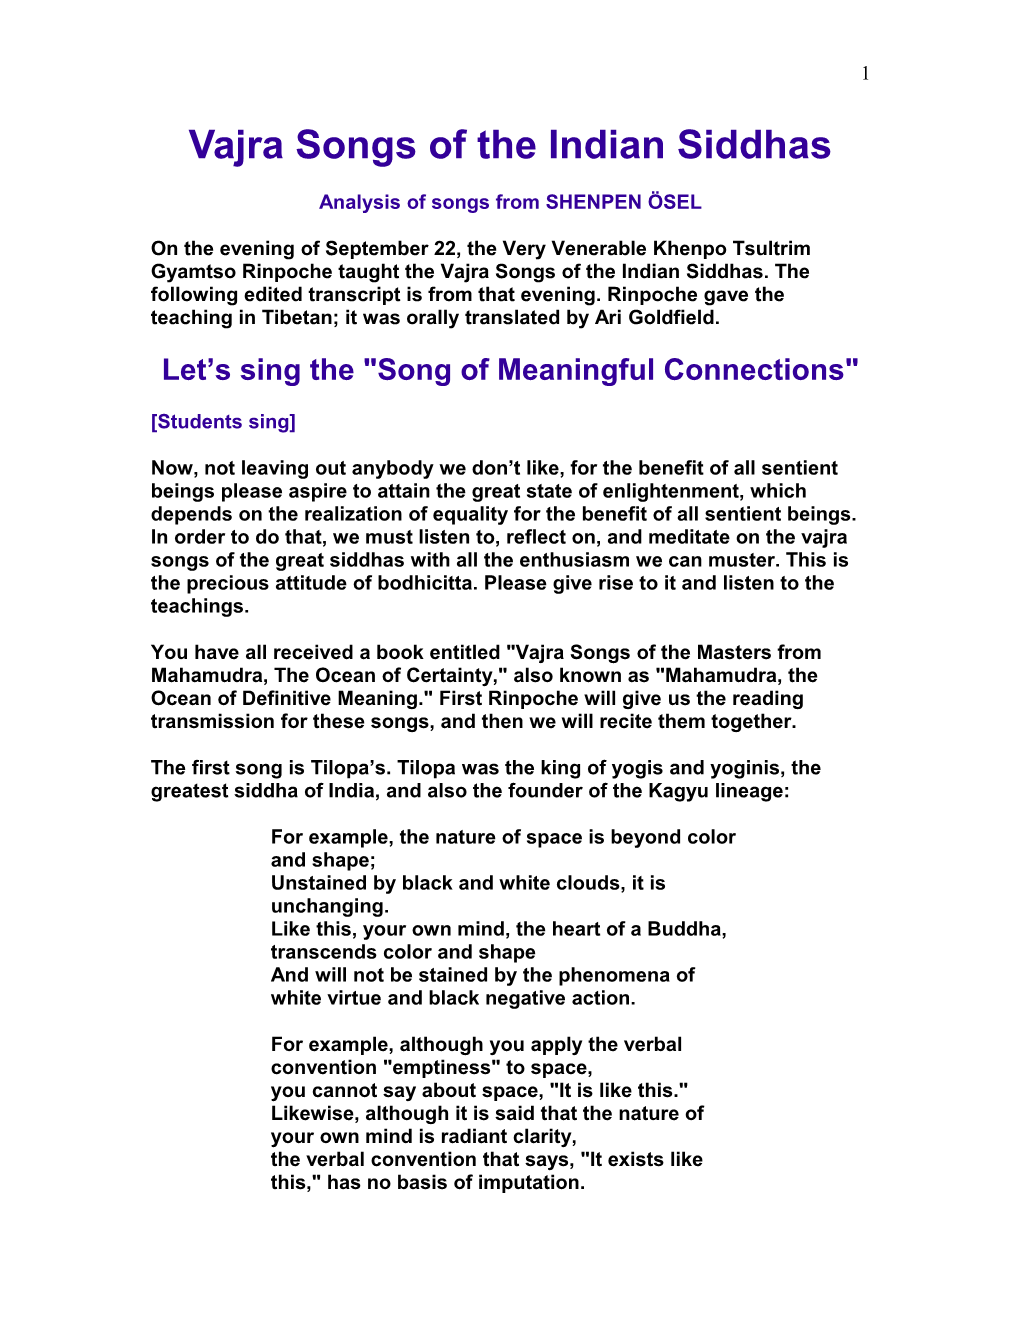 Vajra Songs of the Indian Siddhas